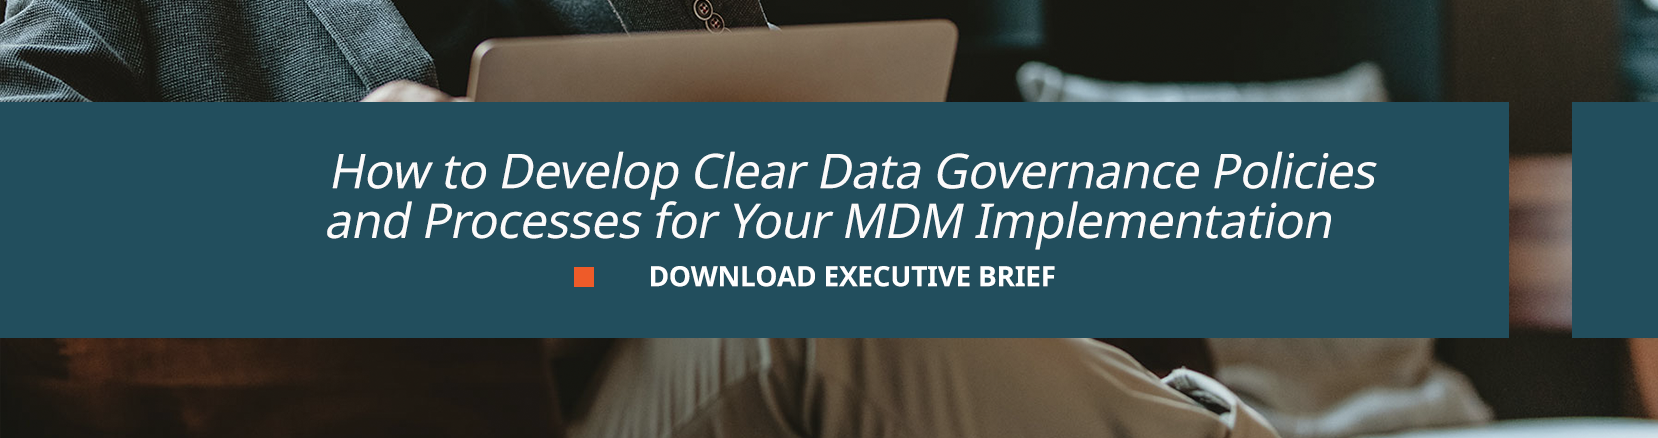 how to develop clear data governance policies and processes for your mdm implementation